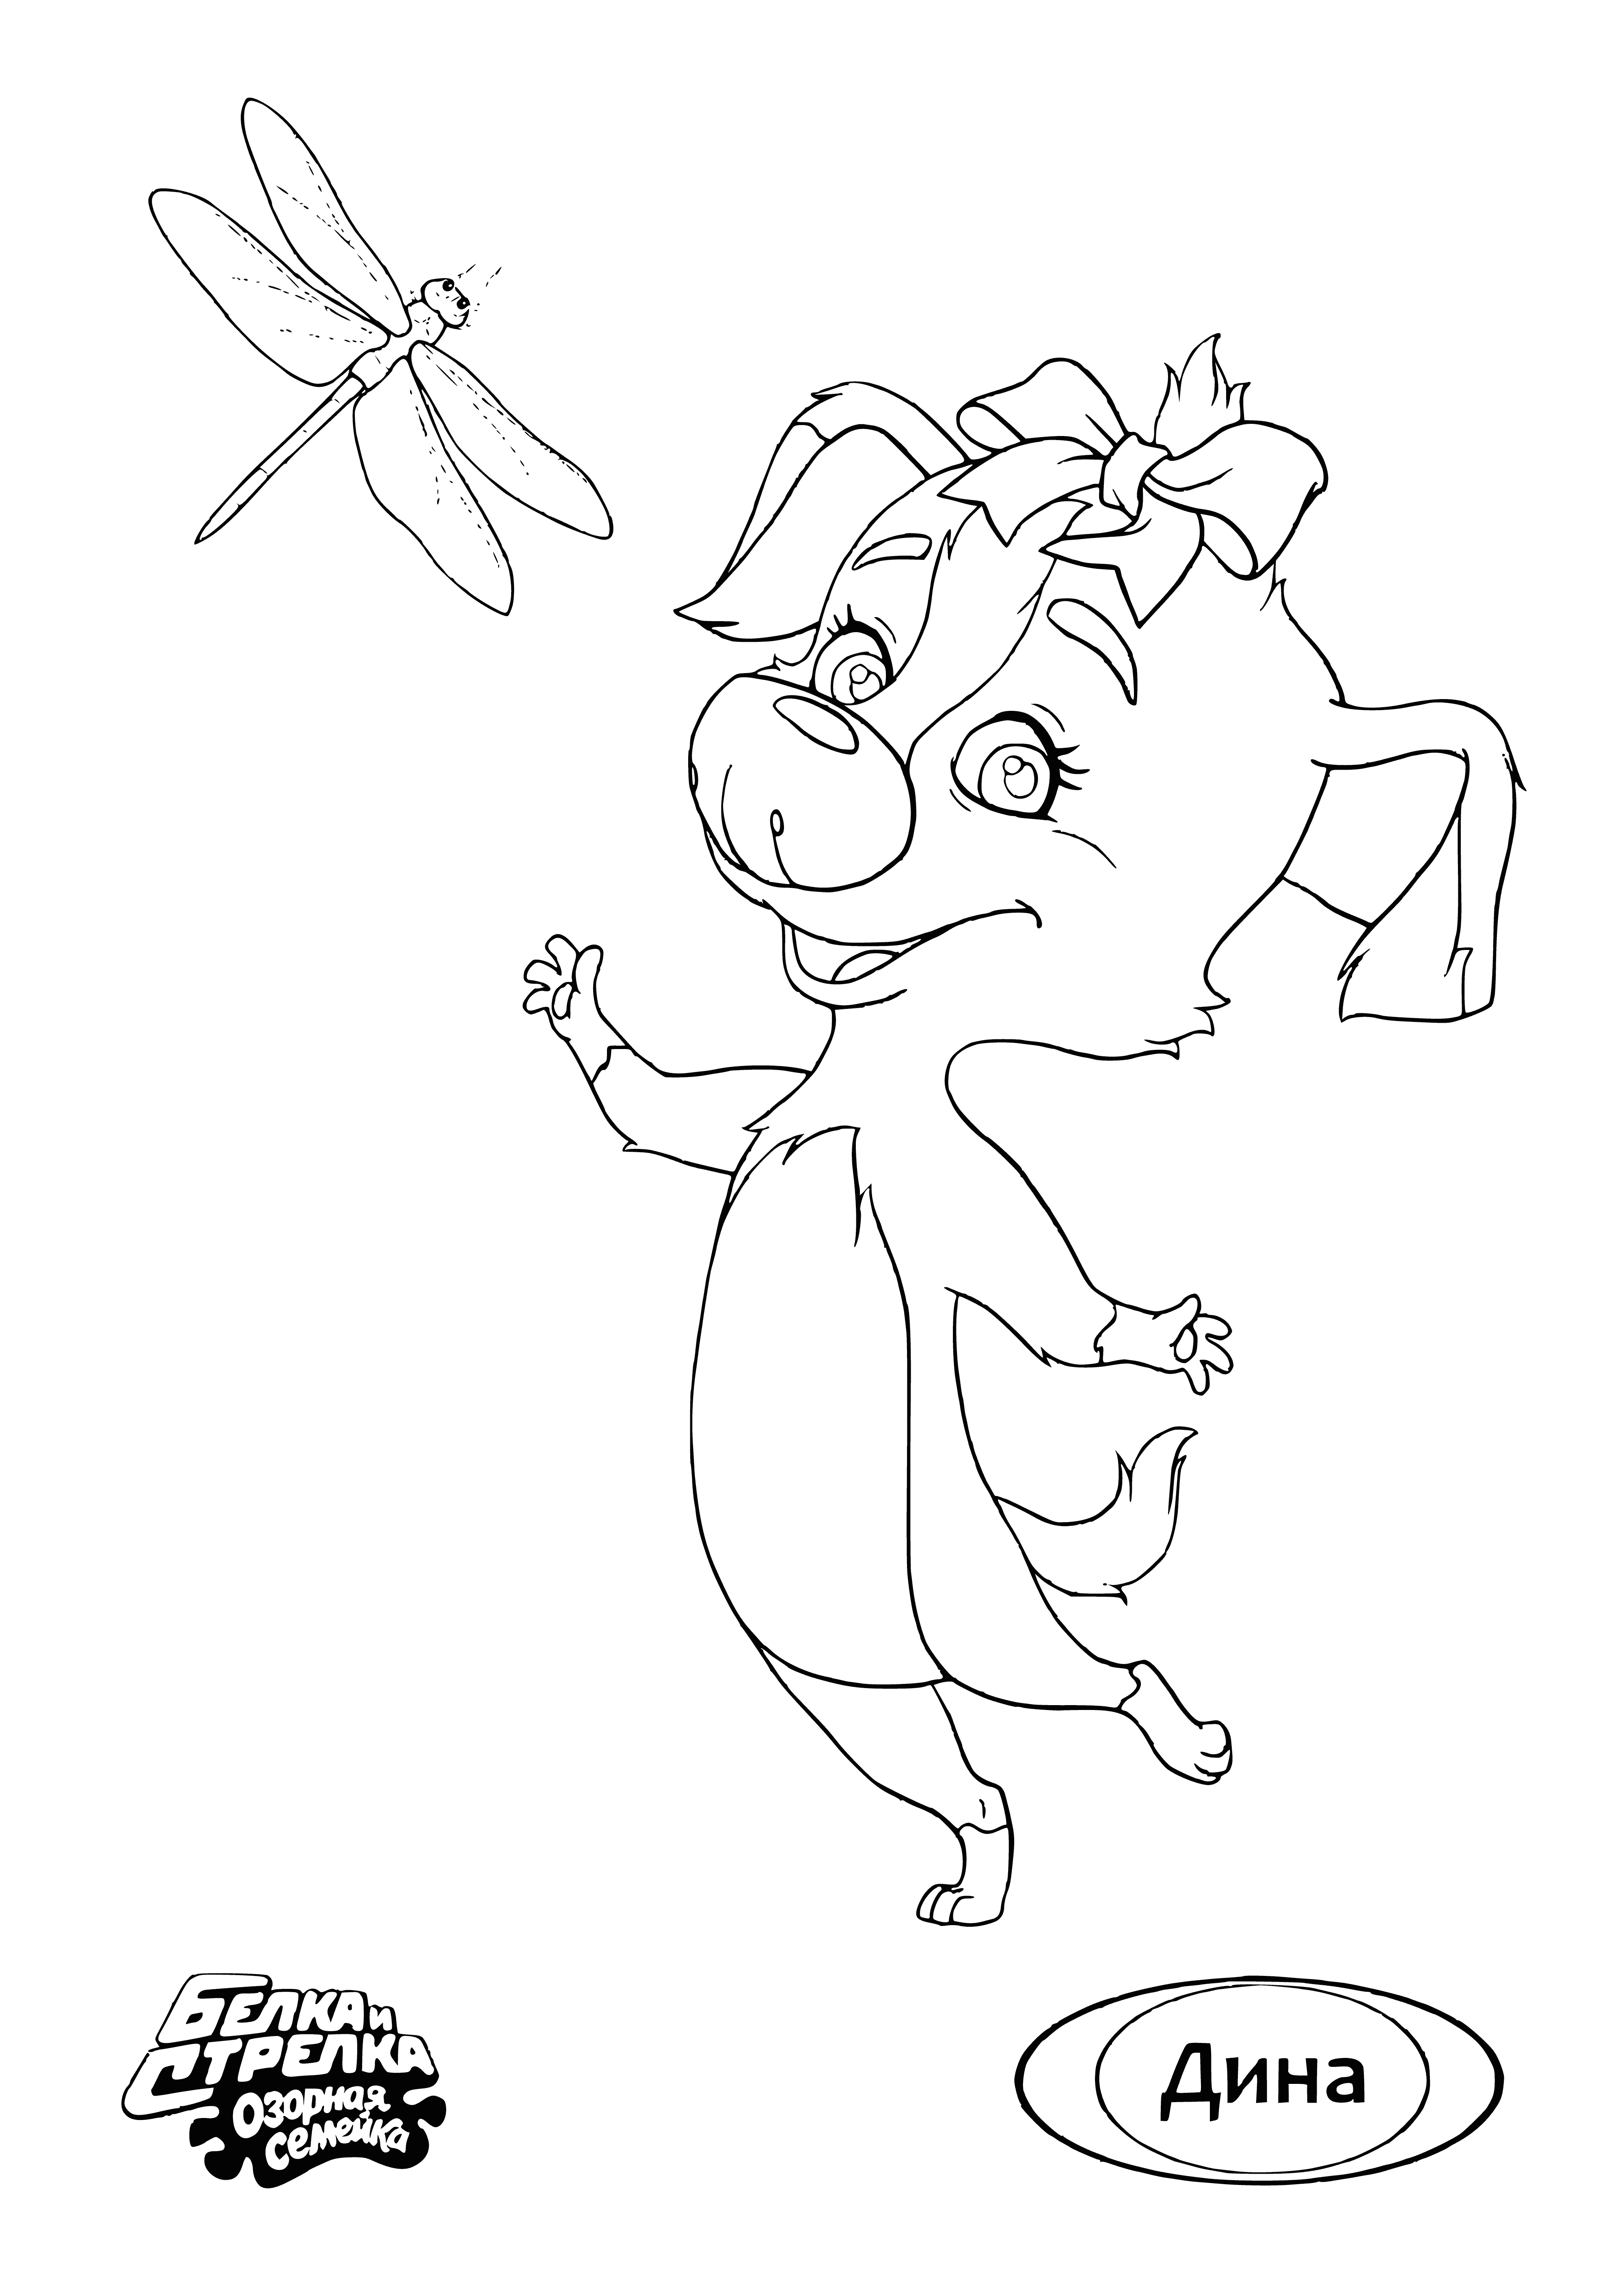 coloring page: Dog and dragonfly playing: dog lying on back, dragonfly flying around head; looks like it’s having fun.